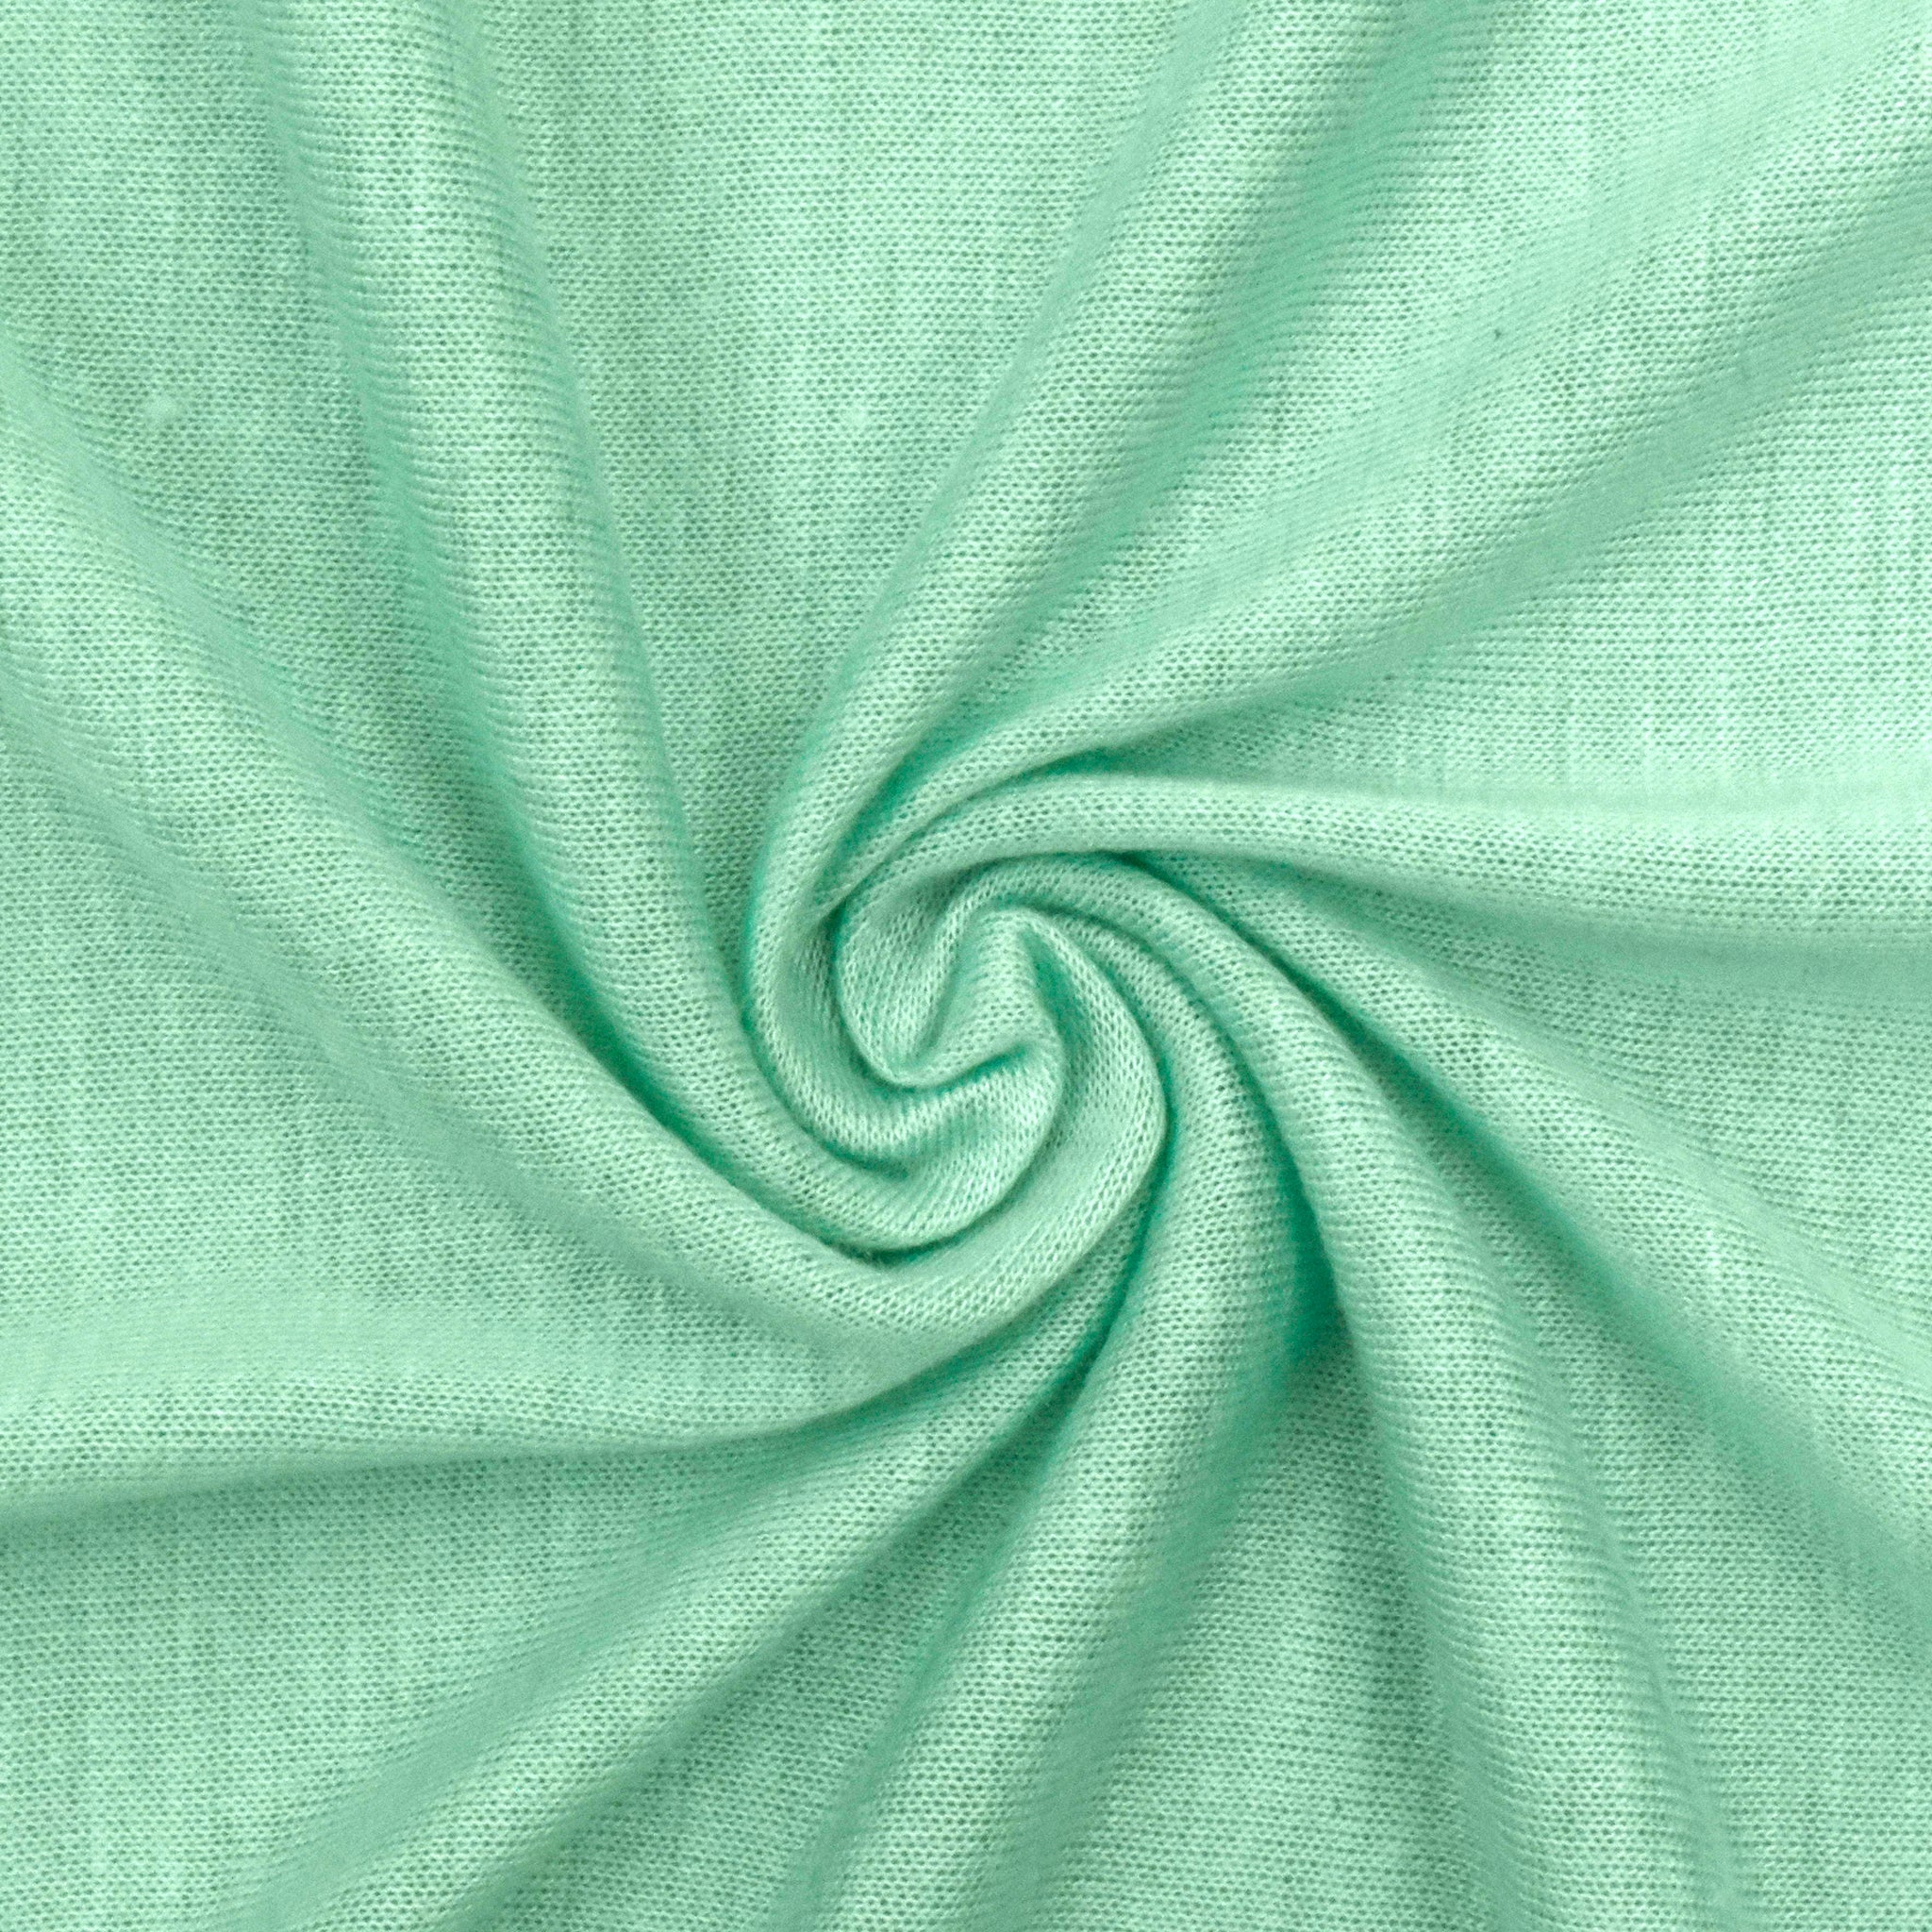 FREE SHIPPING!!! Greenish Solid Slub Cotton Spandex Jersey Knit Fabric, DIY  Projects by the Yard